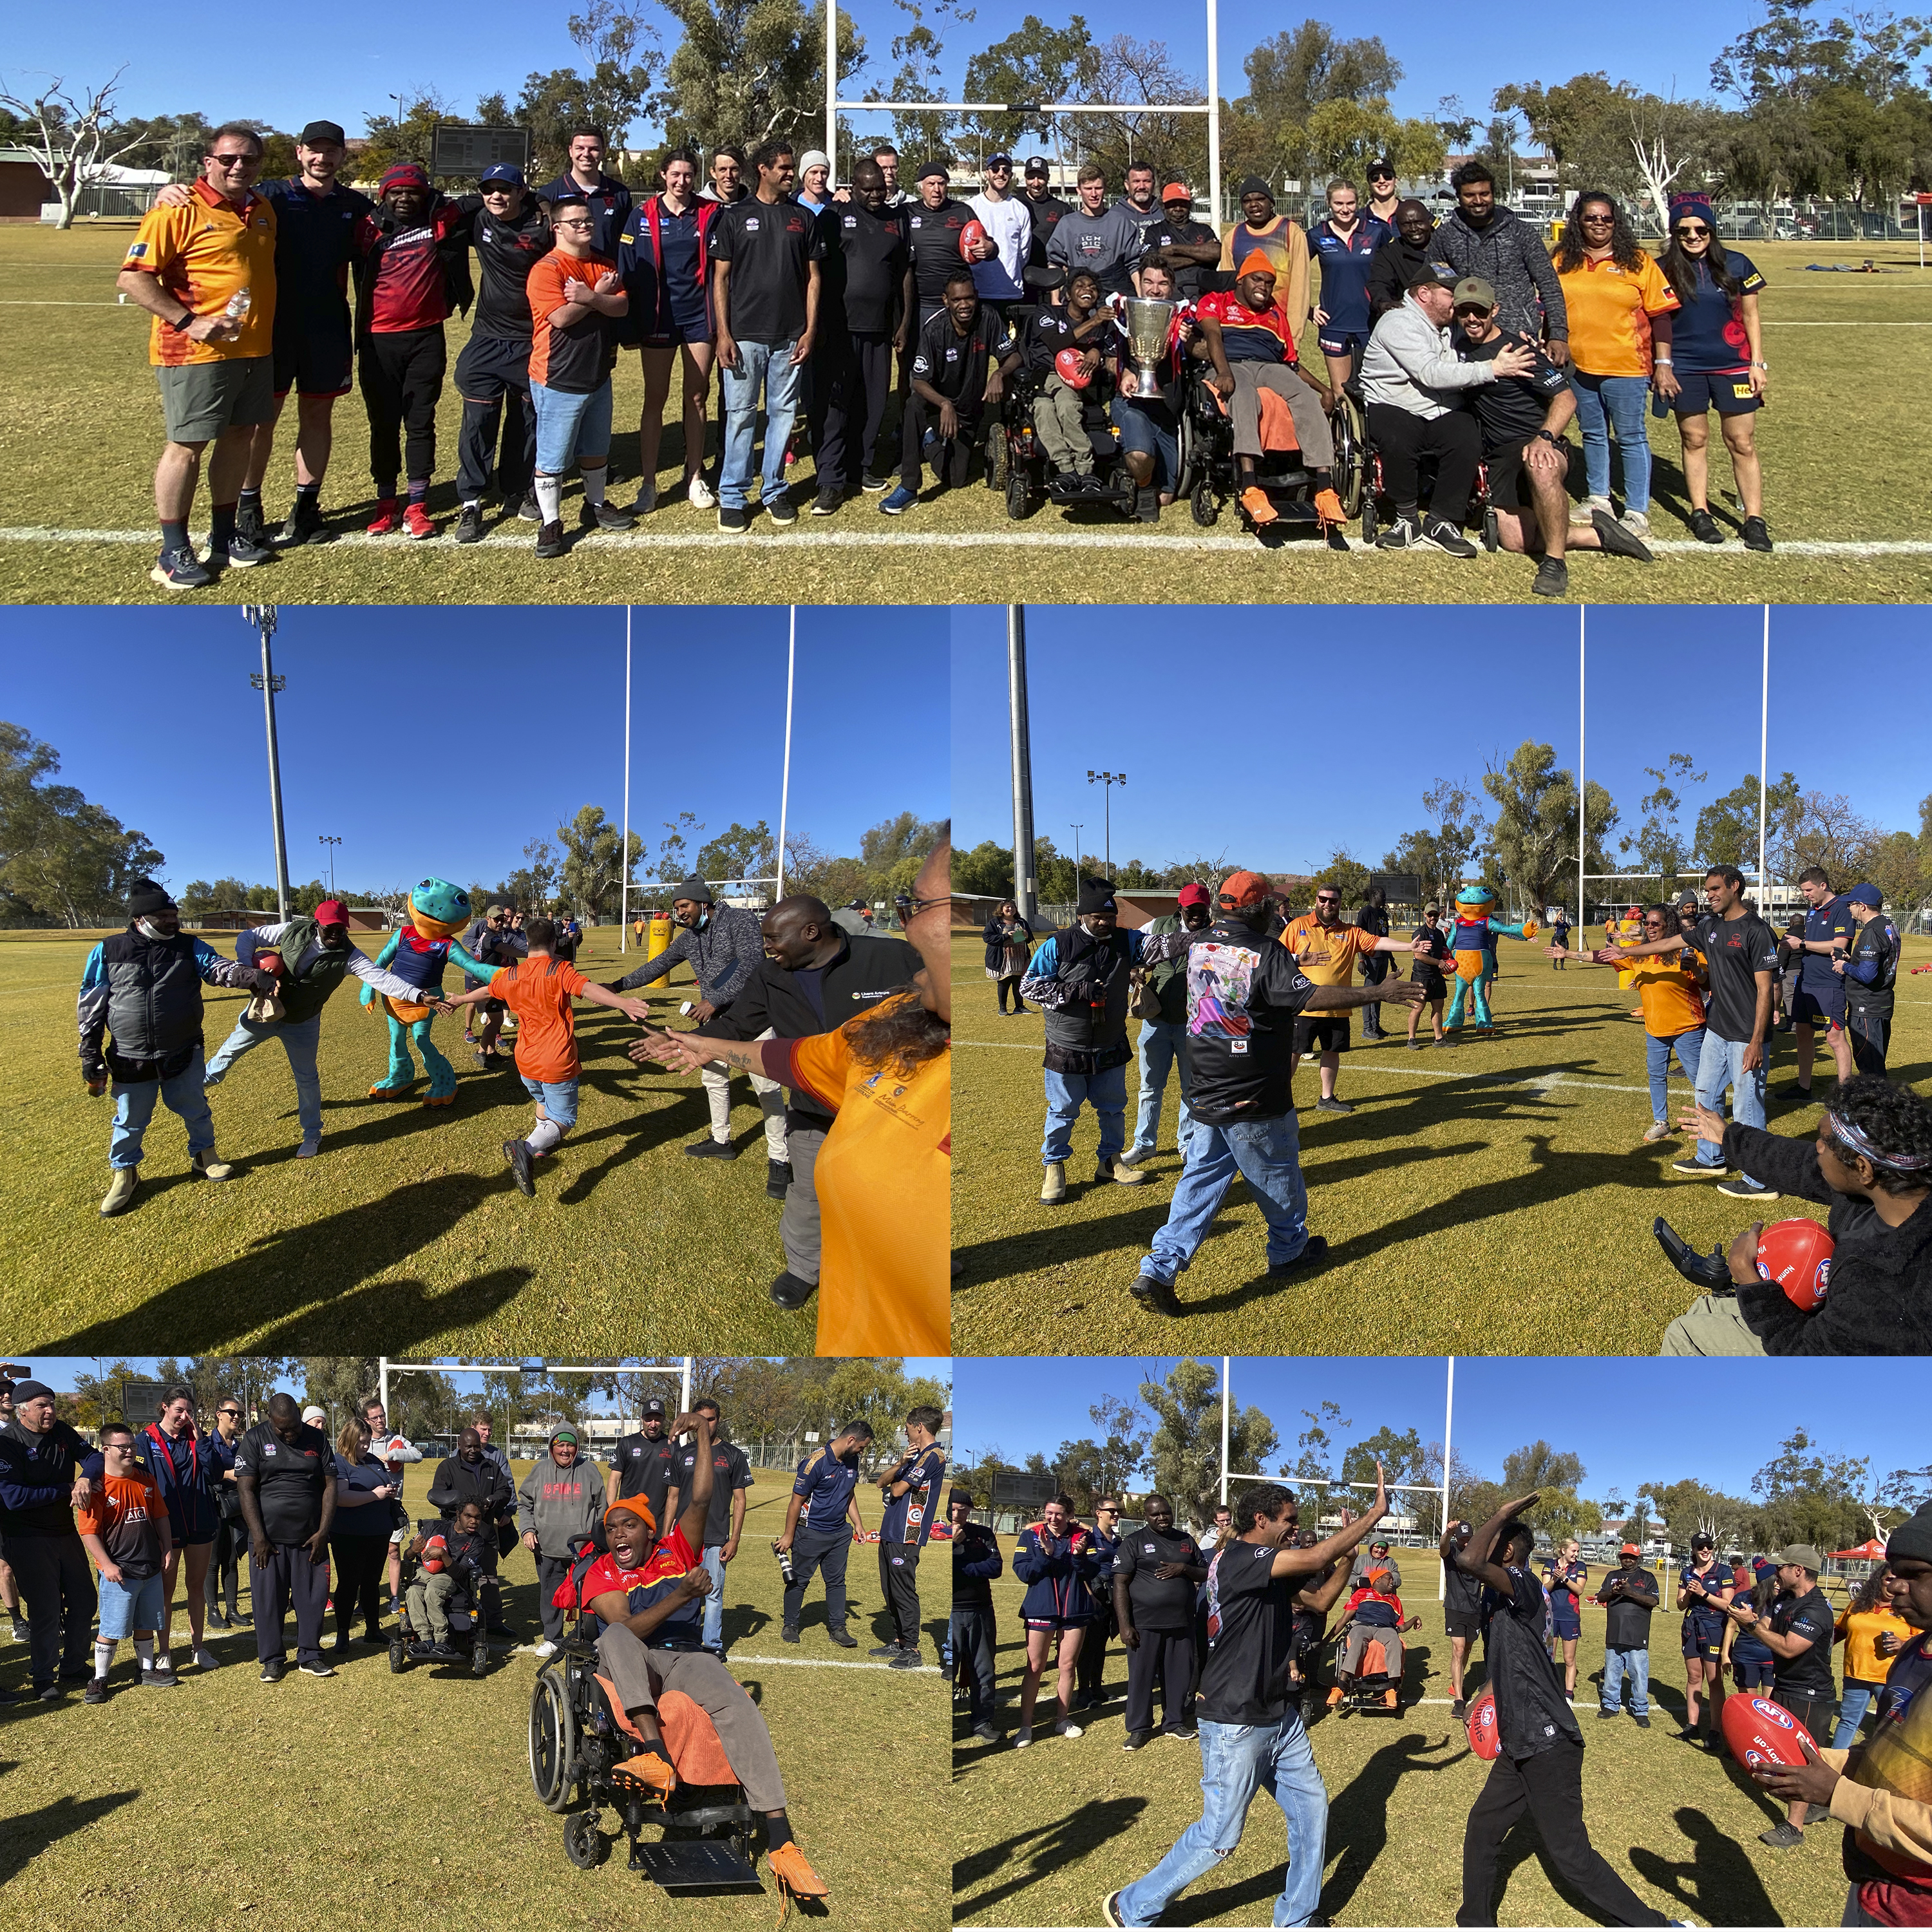 a selection of images of participants of the footy 4 life program, cheering, high 5s, kicking the footy, celebrating together